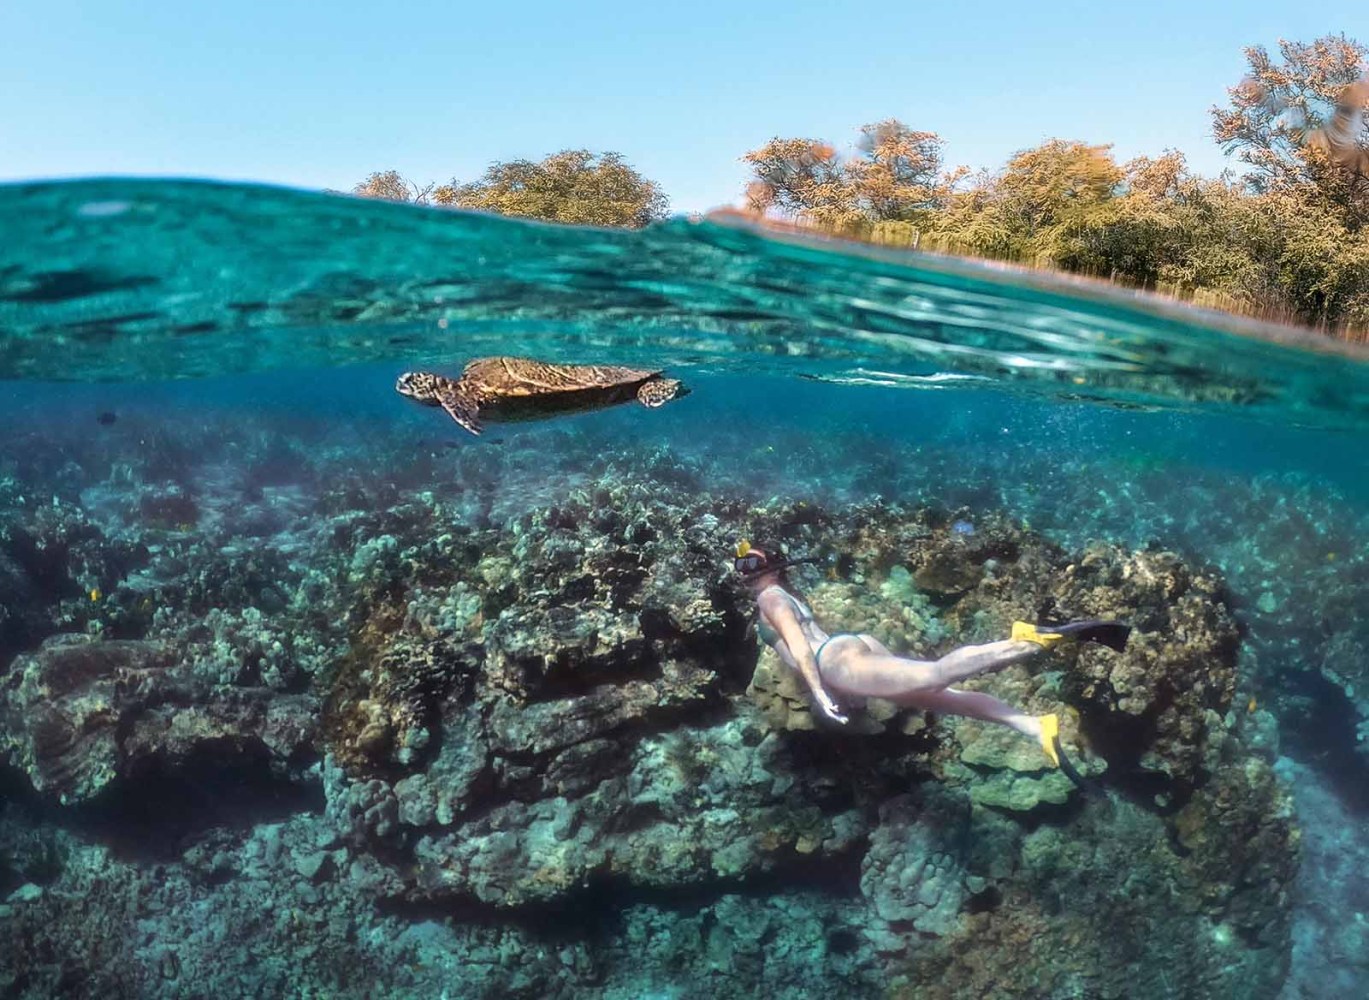 Snorkeler finds a turtle in Hawaii's beautiful waters